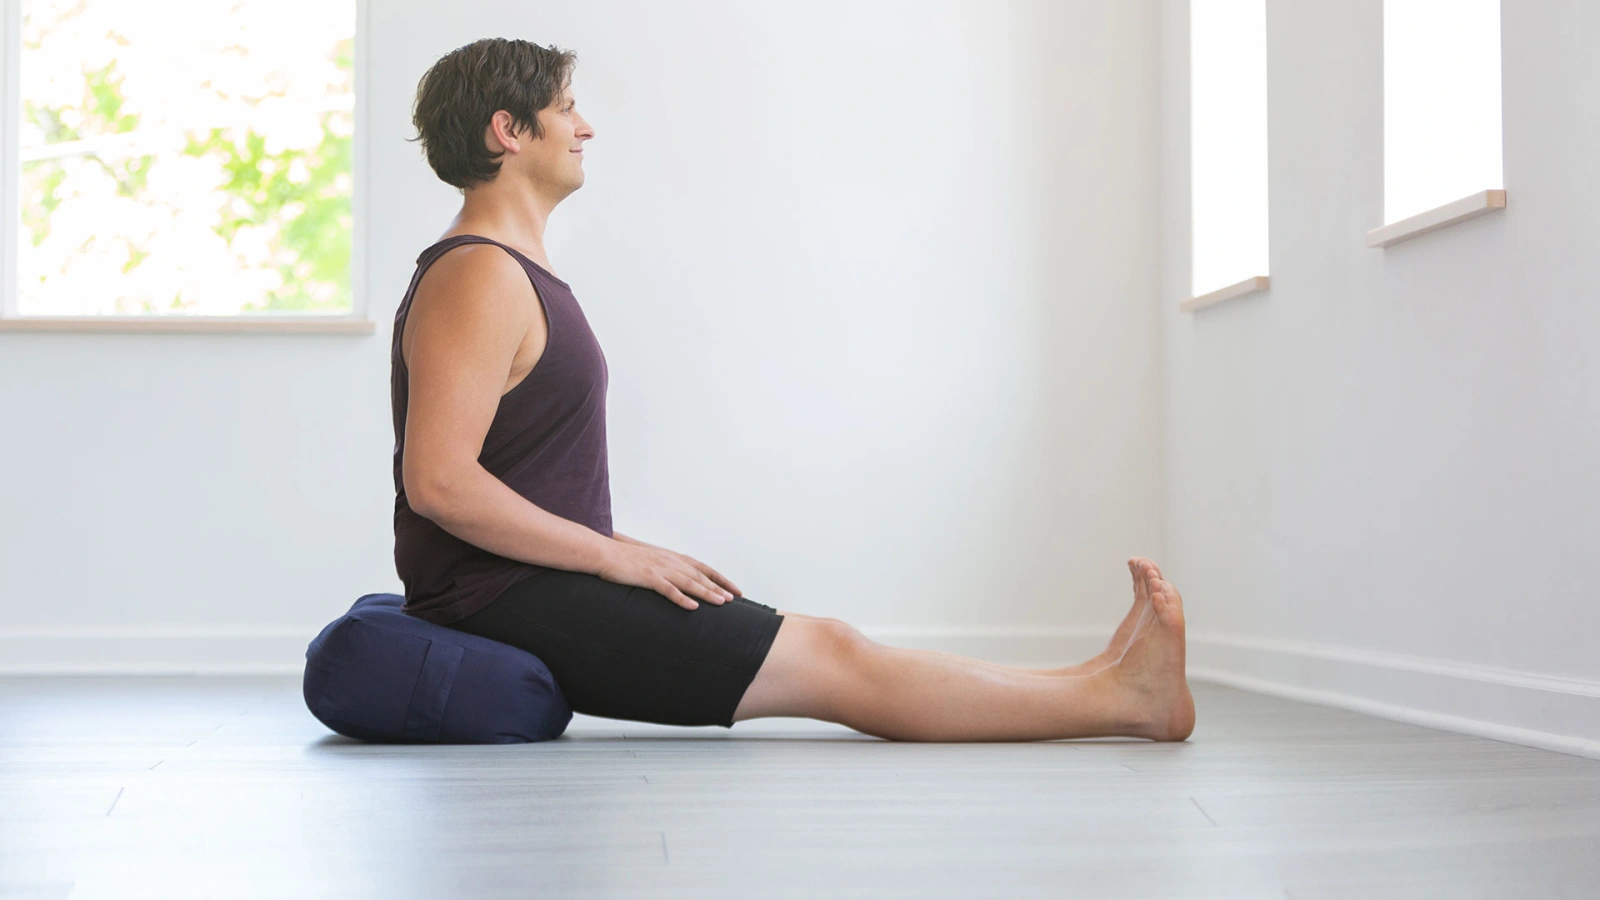 Morning Yoga Poses for Beginners - Great for Tight Hamstrings